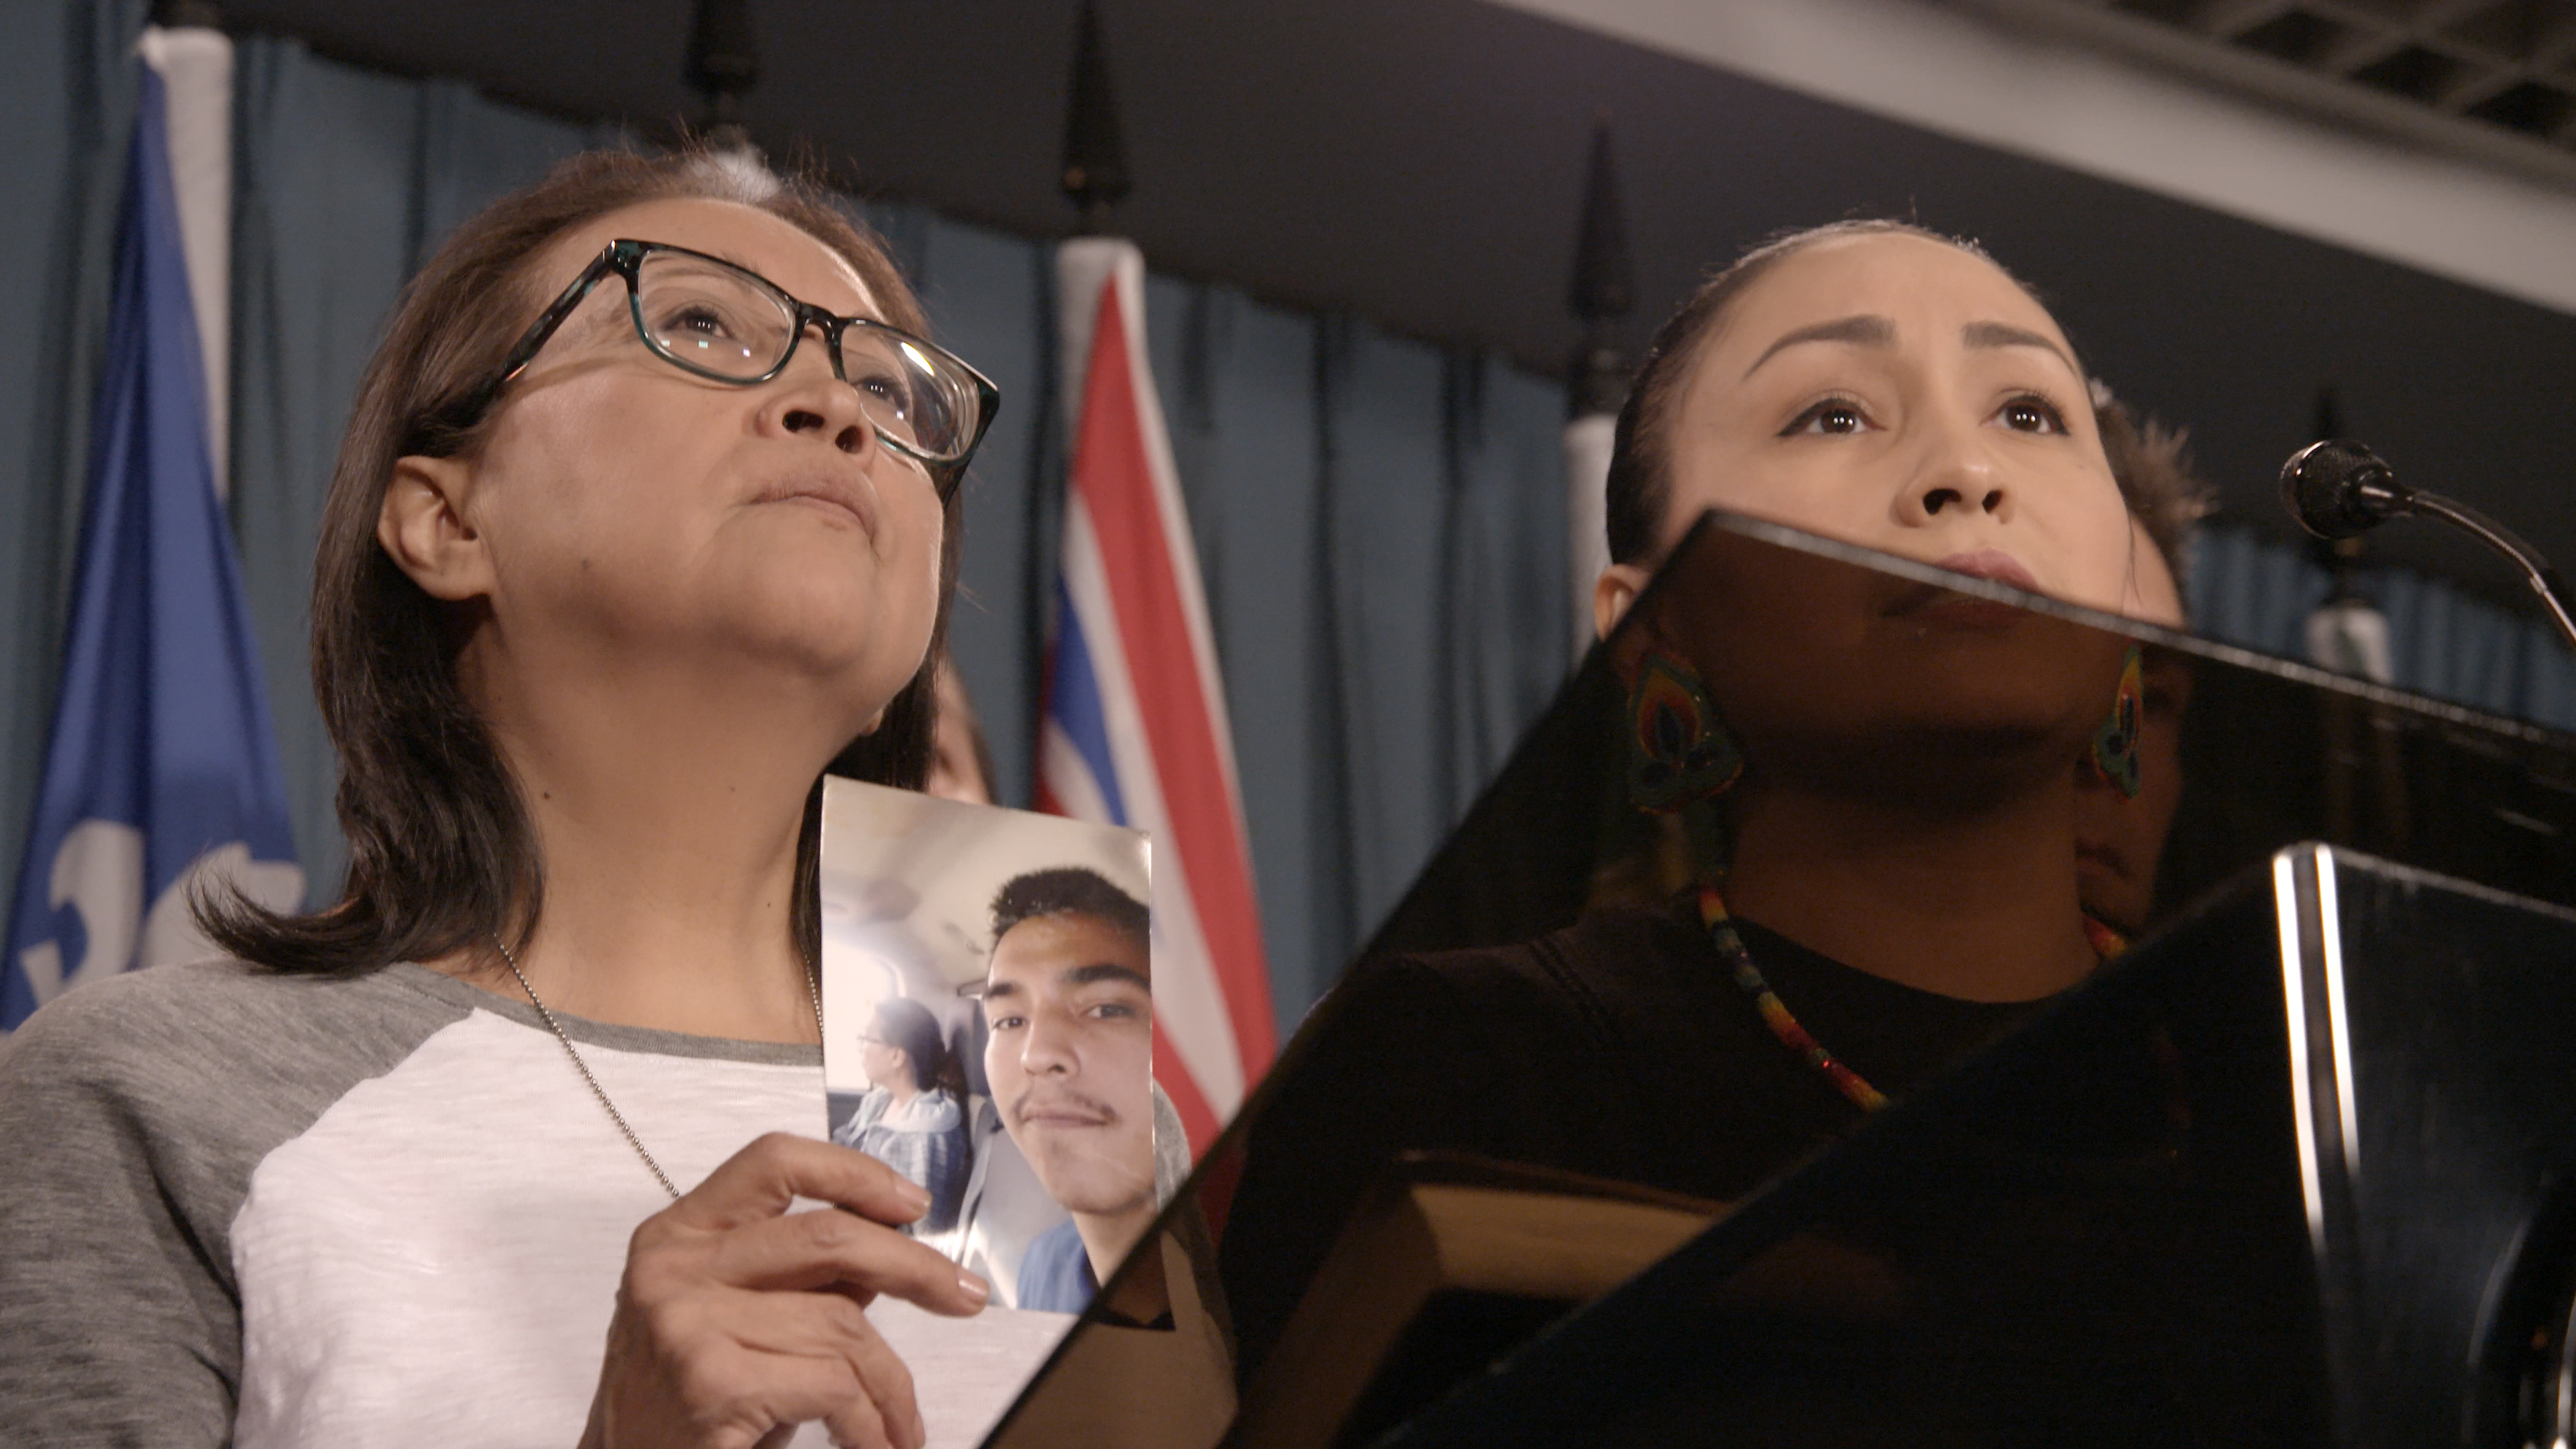 Colten Boushie's family at press conference. Image: National Film Board